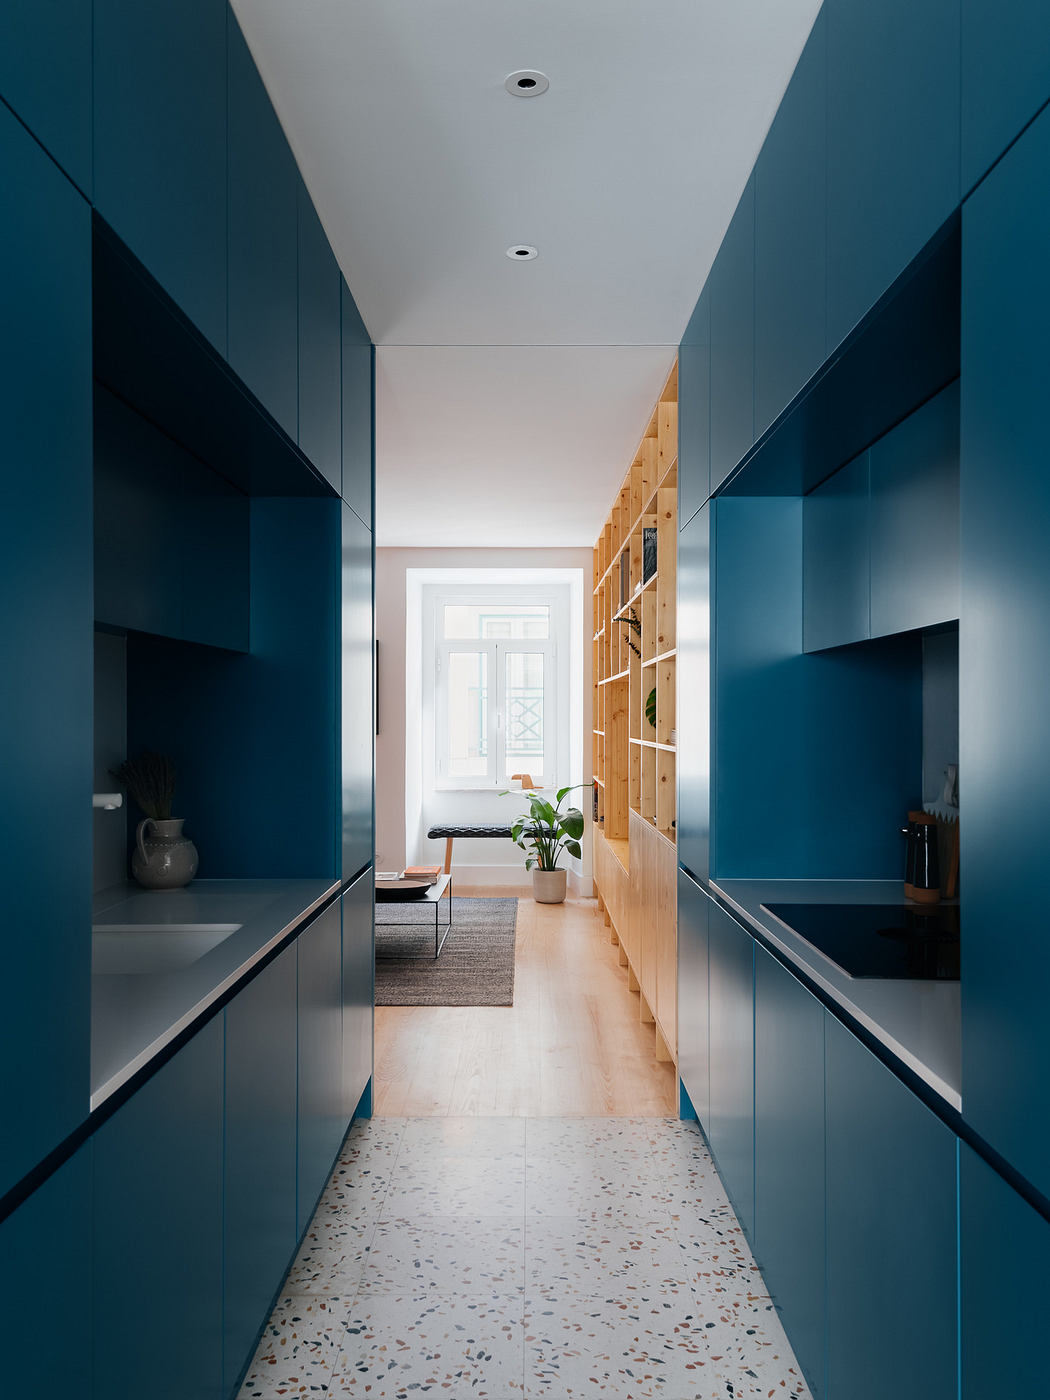 Narrow corridor lined with blue cabinets leading to a bright room with wooden shelving